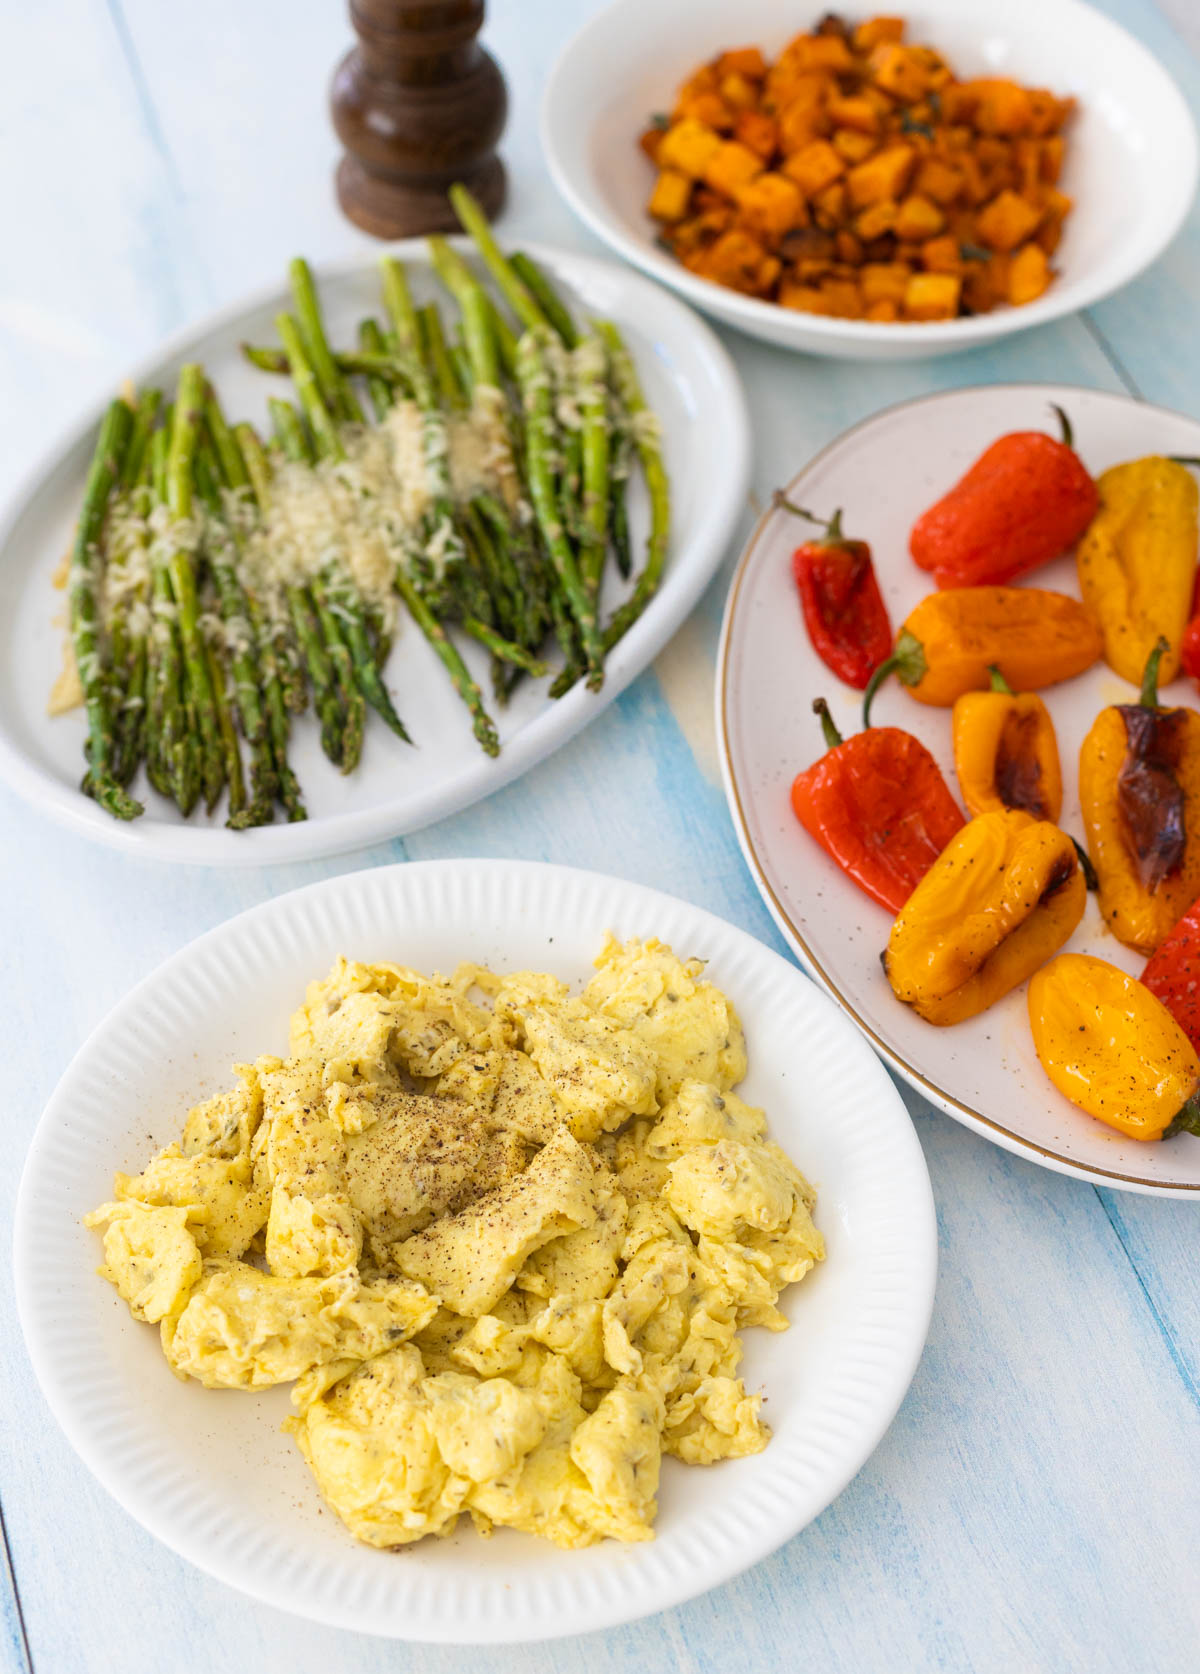 The plate of scrambled eggs sits in a buffet with plates of roasted vegetables all around.